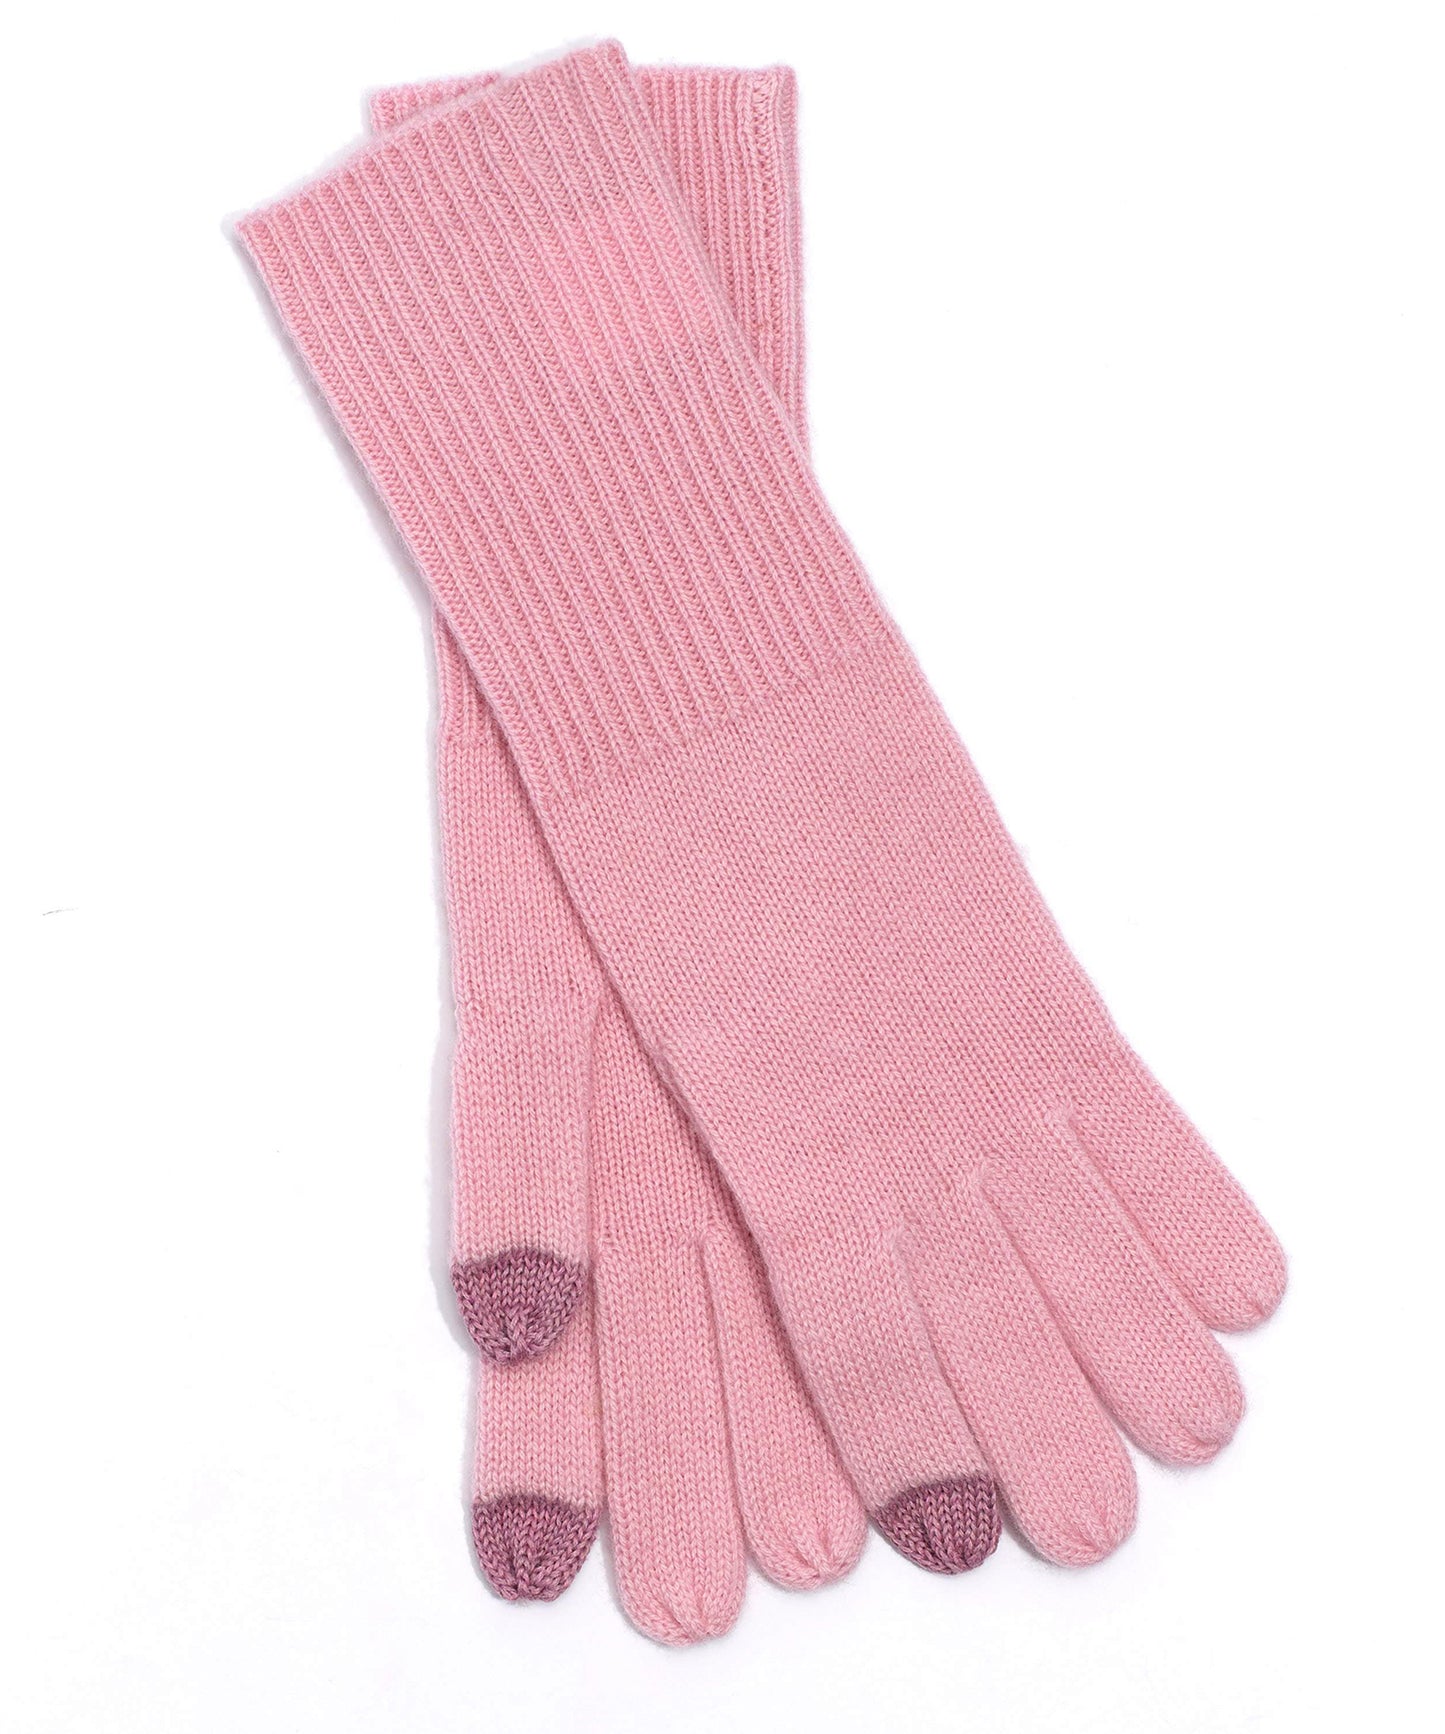 Wool/Cashmere  Gloves in color Cloud Pink